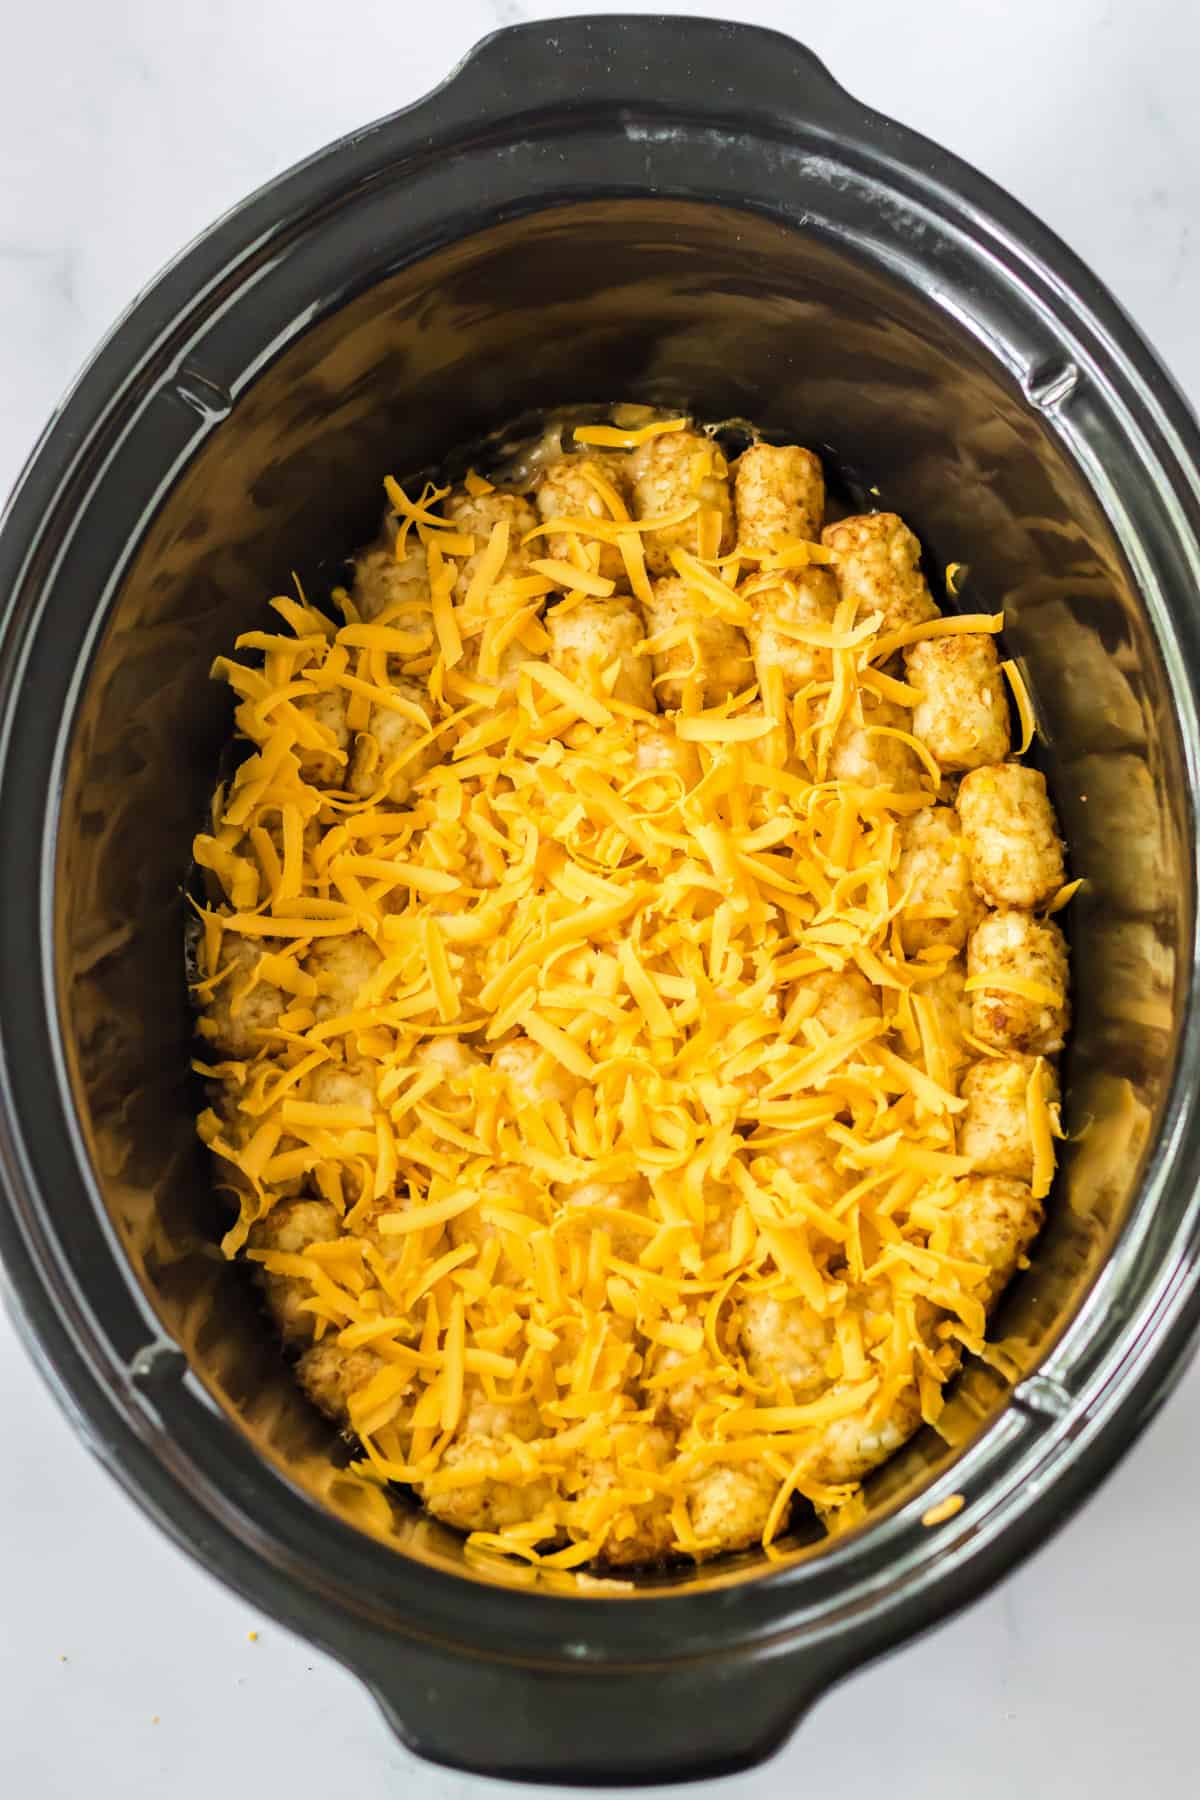 Shredded cheese on top of tater tot casserole in crockpot.